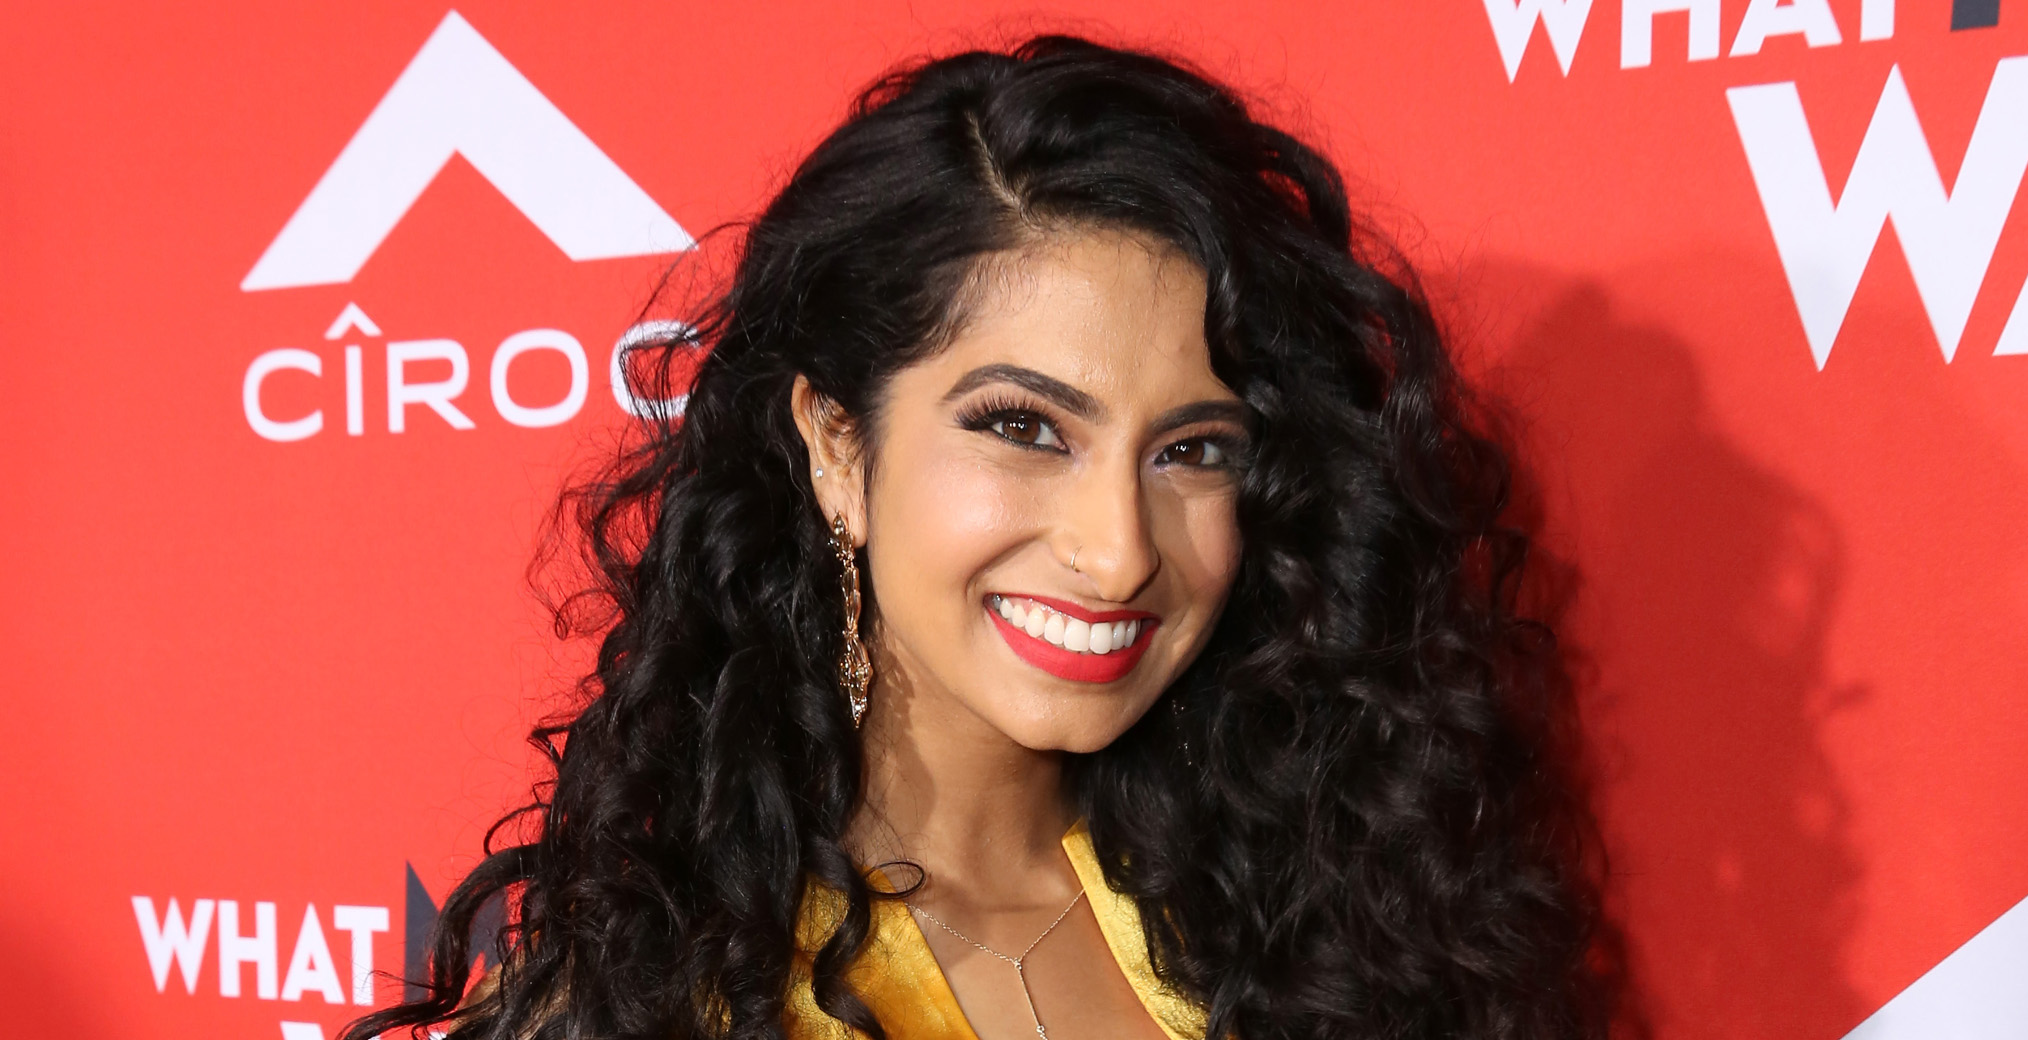 Meena Girl Sex Video - 4400' Alum Kausar Mohammed Joins 'The Flash' as Fast Track (VIDEO)